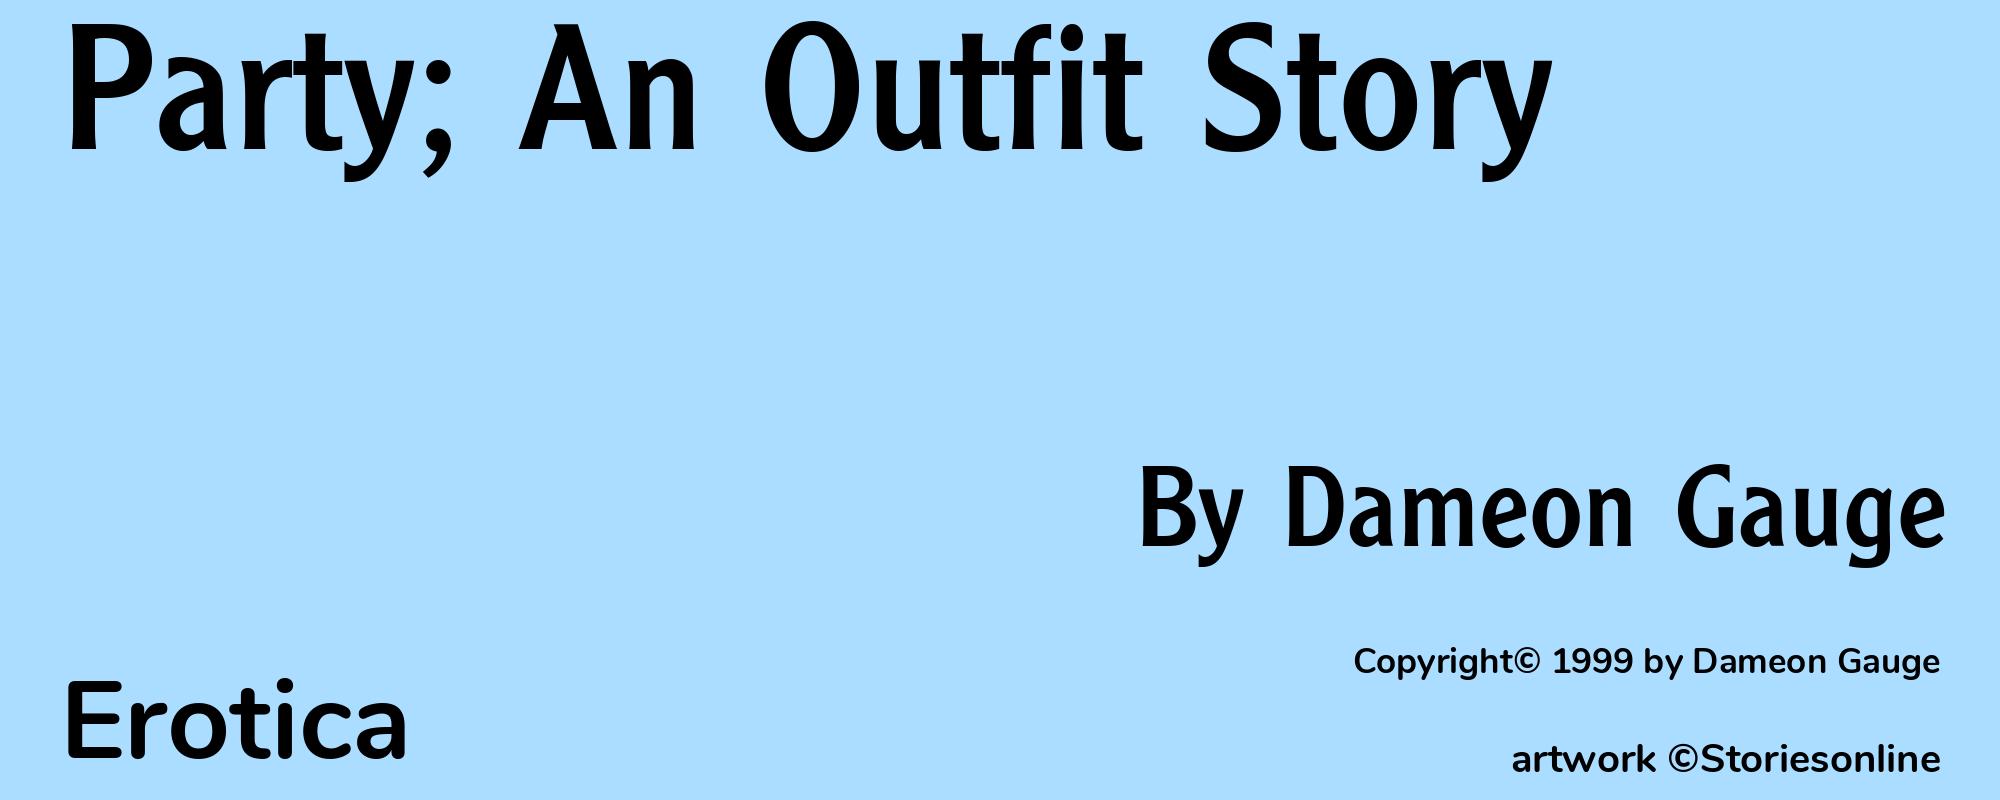 Party; An Outfit Story - Cover